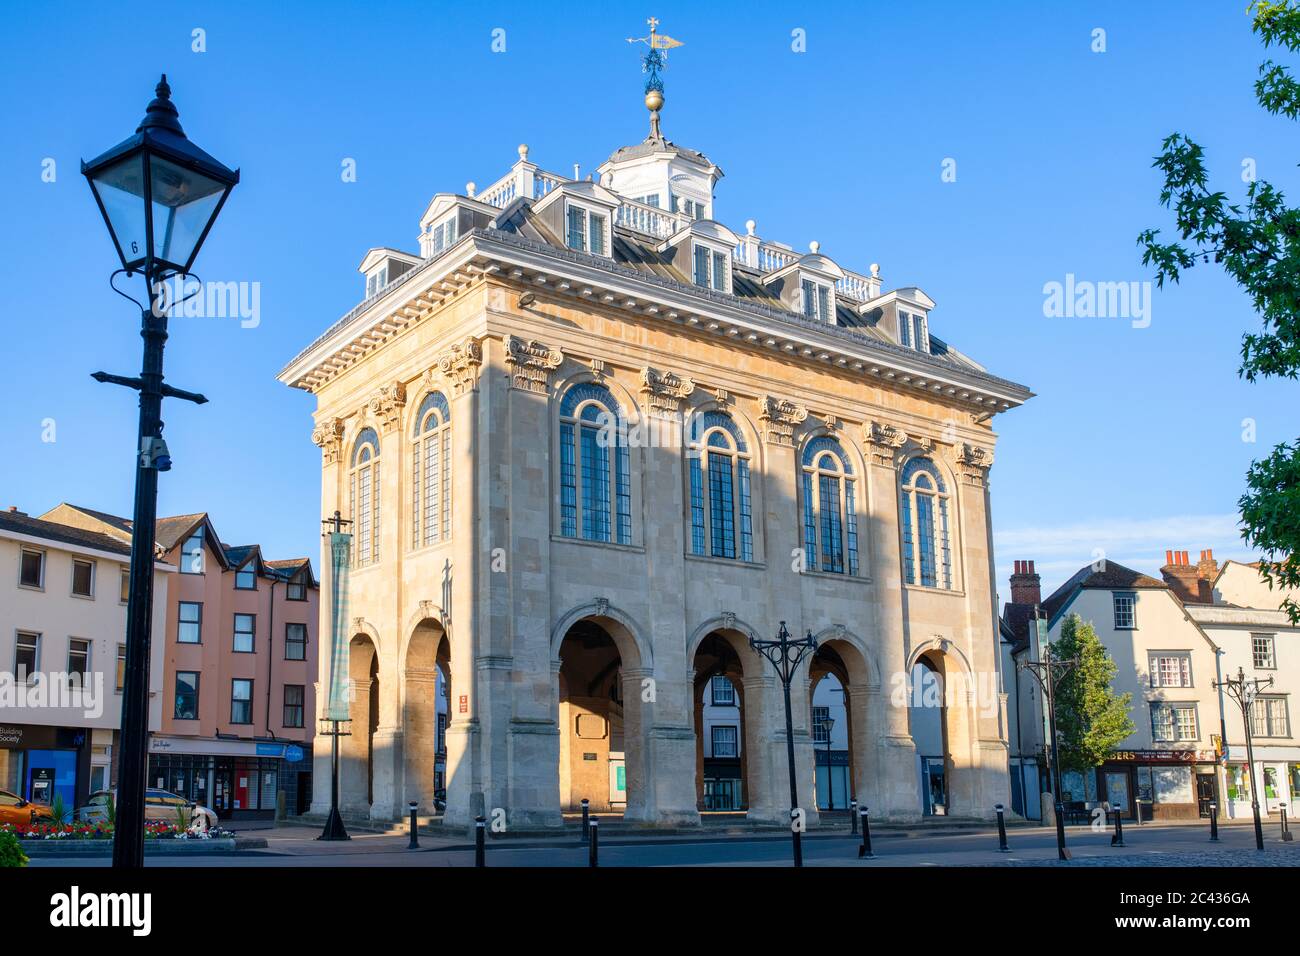 Abingdon county hall museum just after sunrise. Abingdon on Thames, Oxfordshire, England Stock Photo